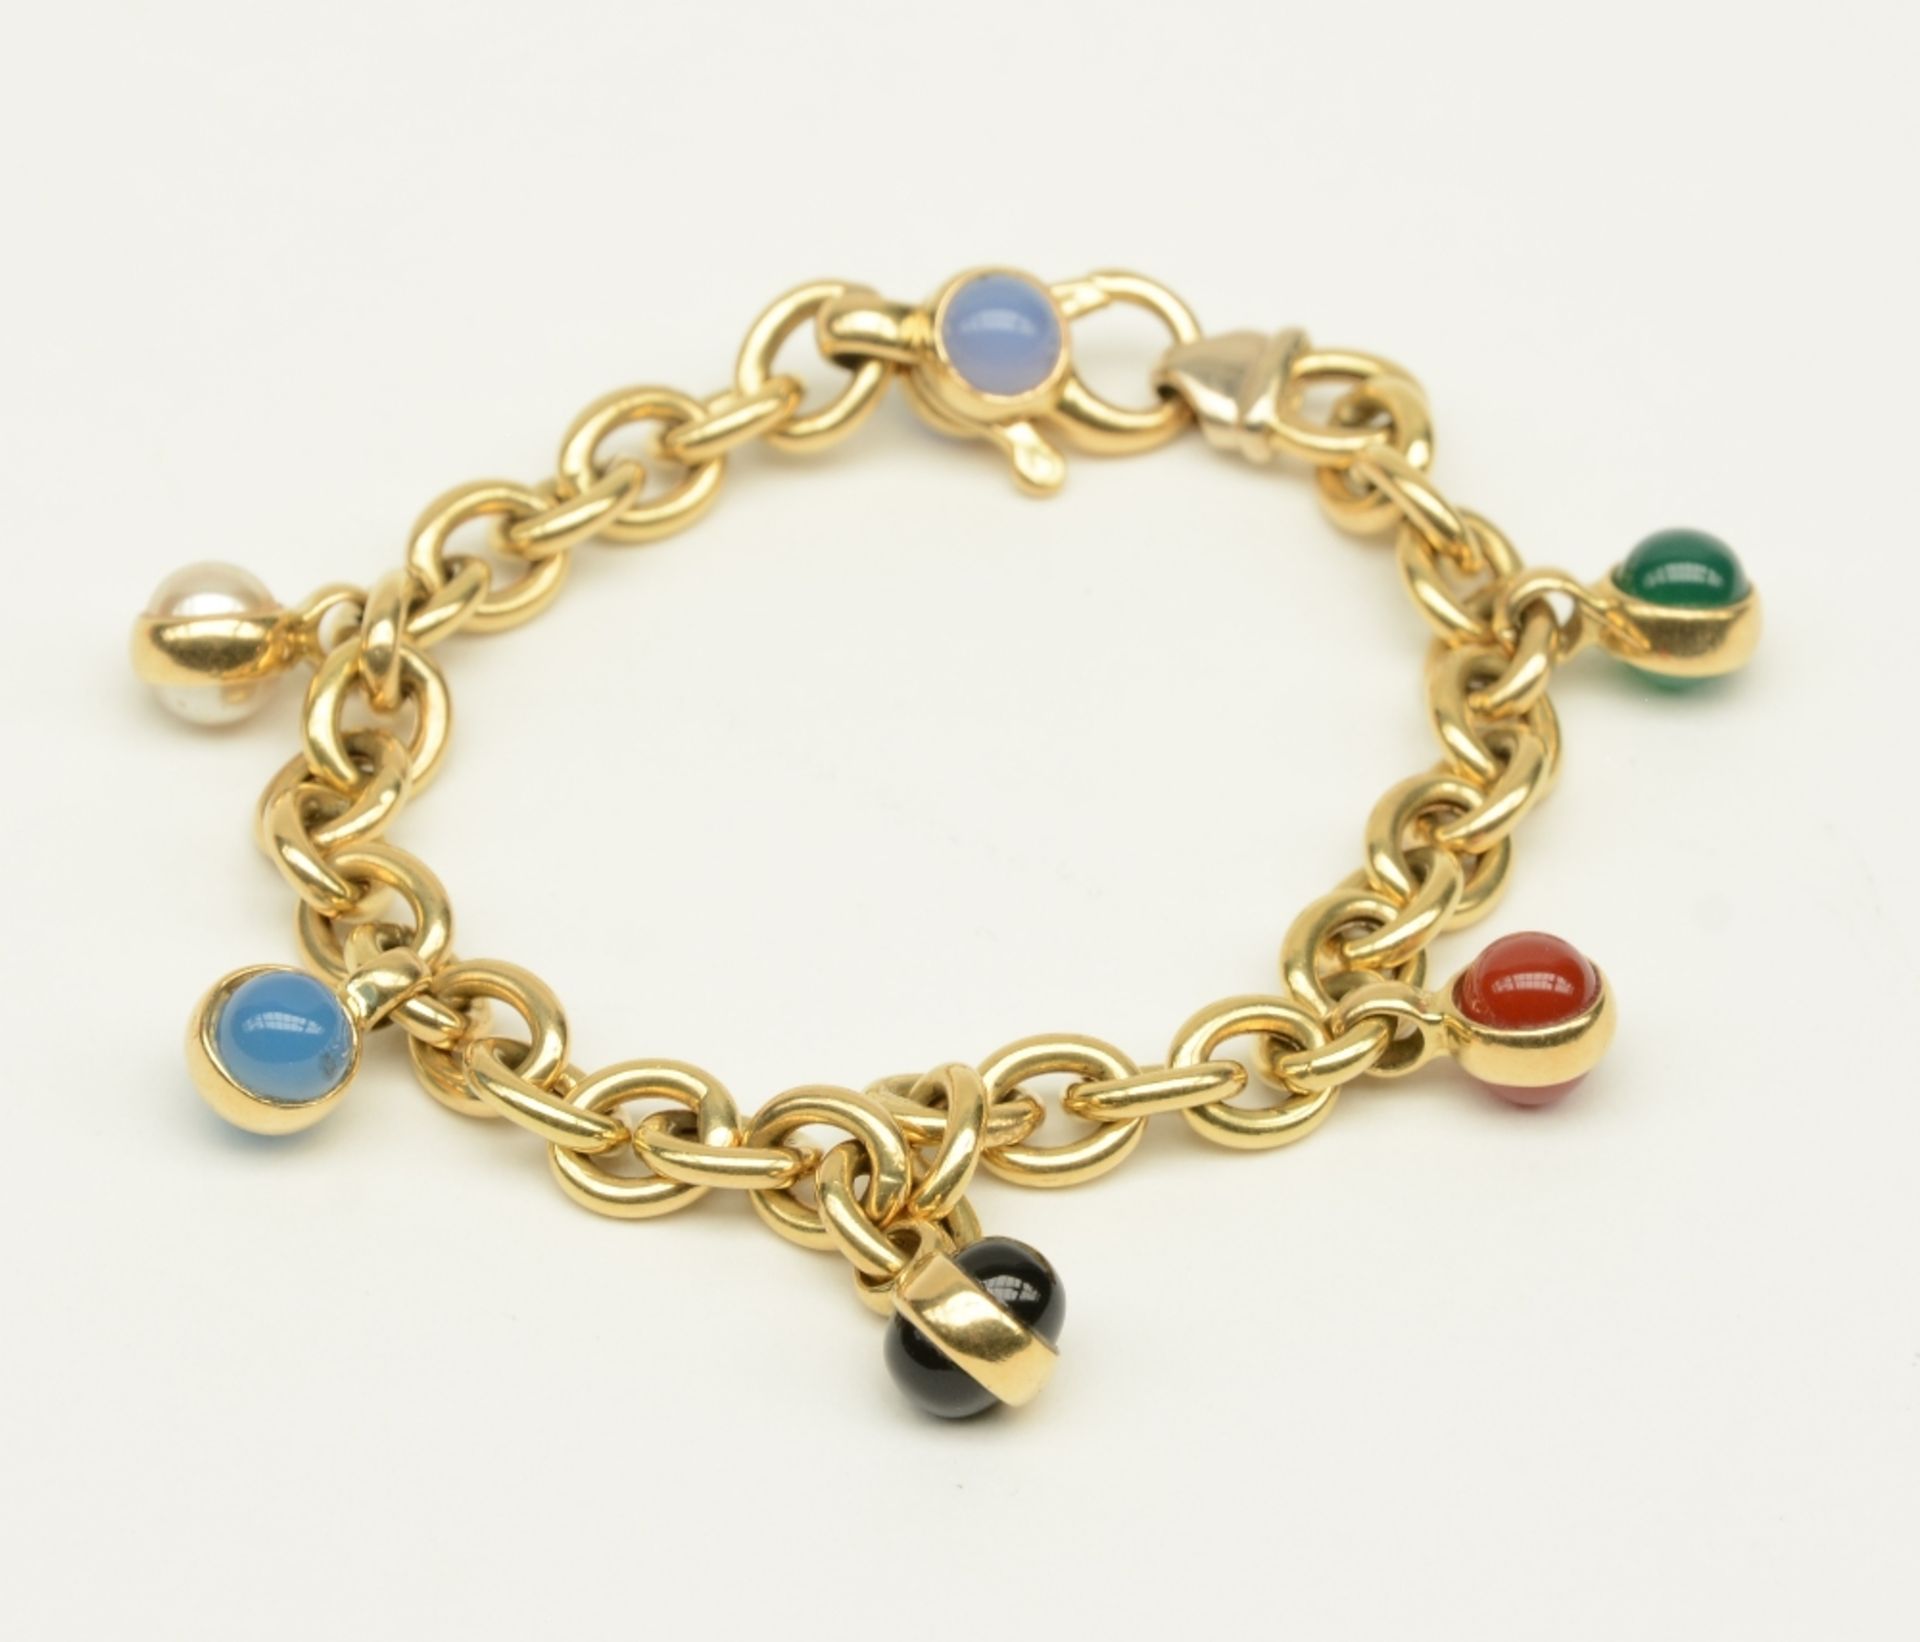 An 18ct gold bracelet, set with various semi-precious stones, L 18,5 cm, Total weight: ca. 18,7 g